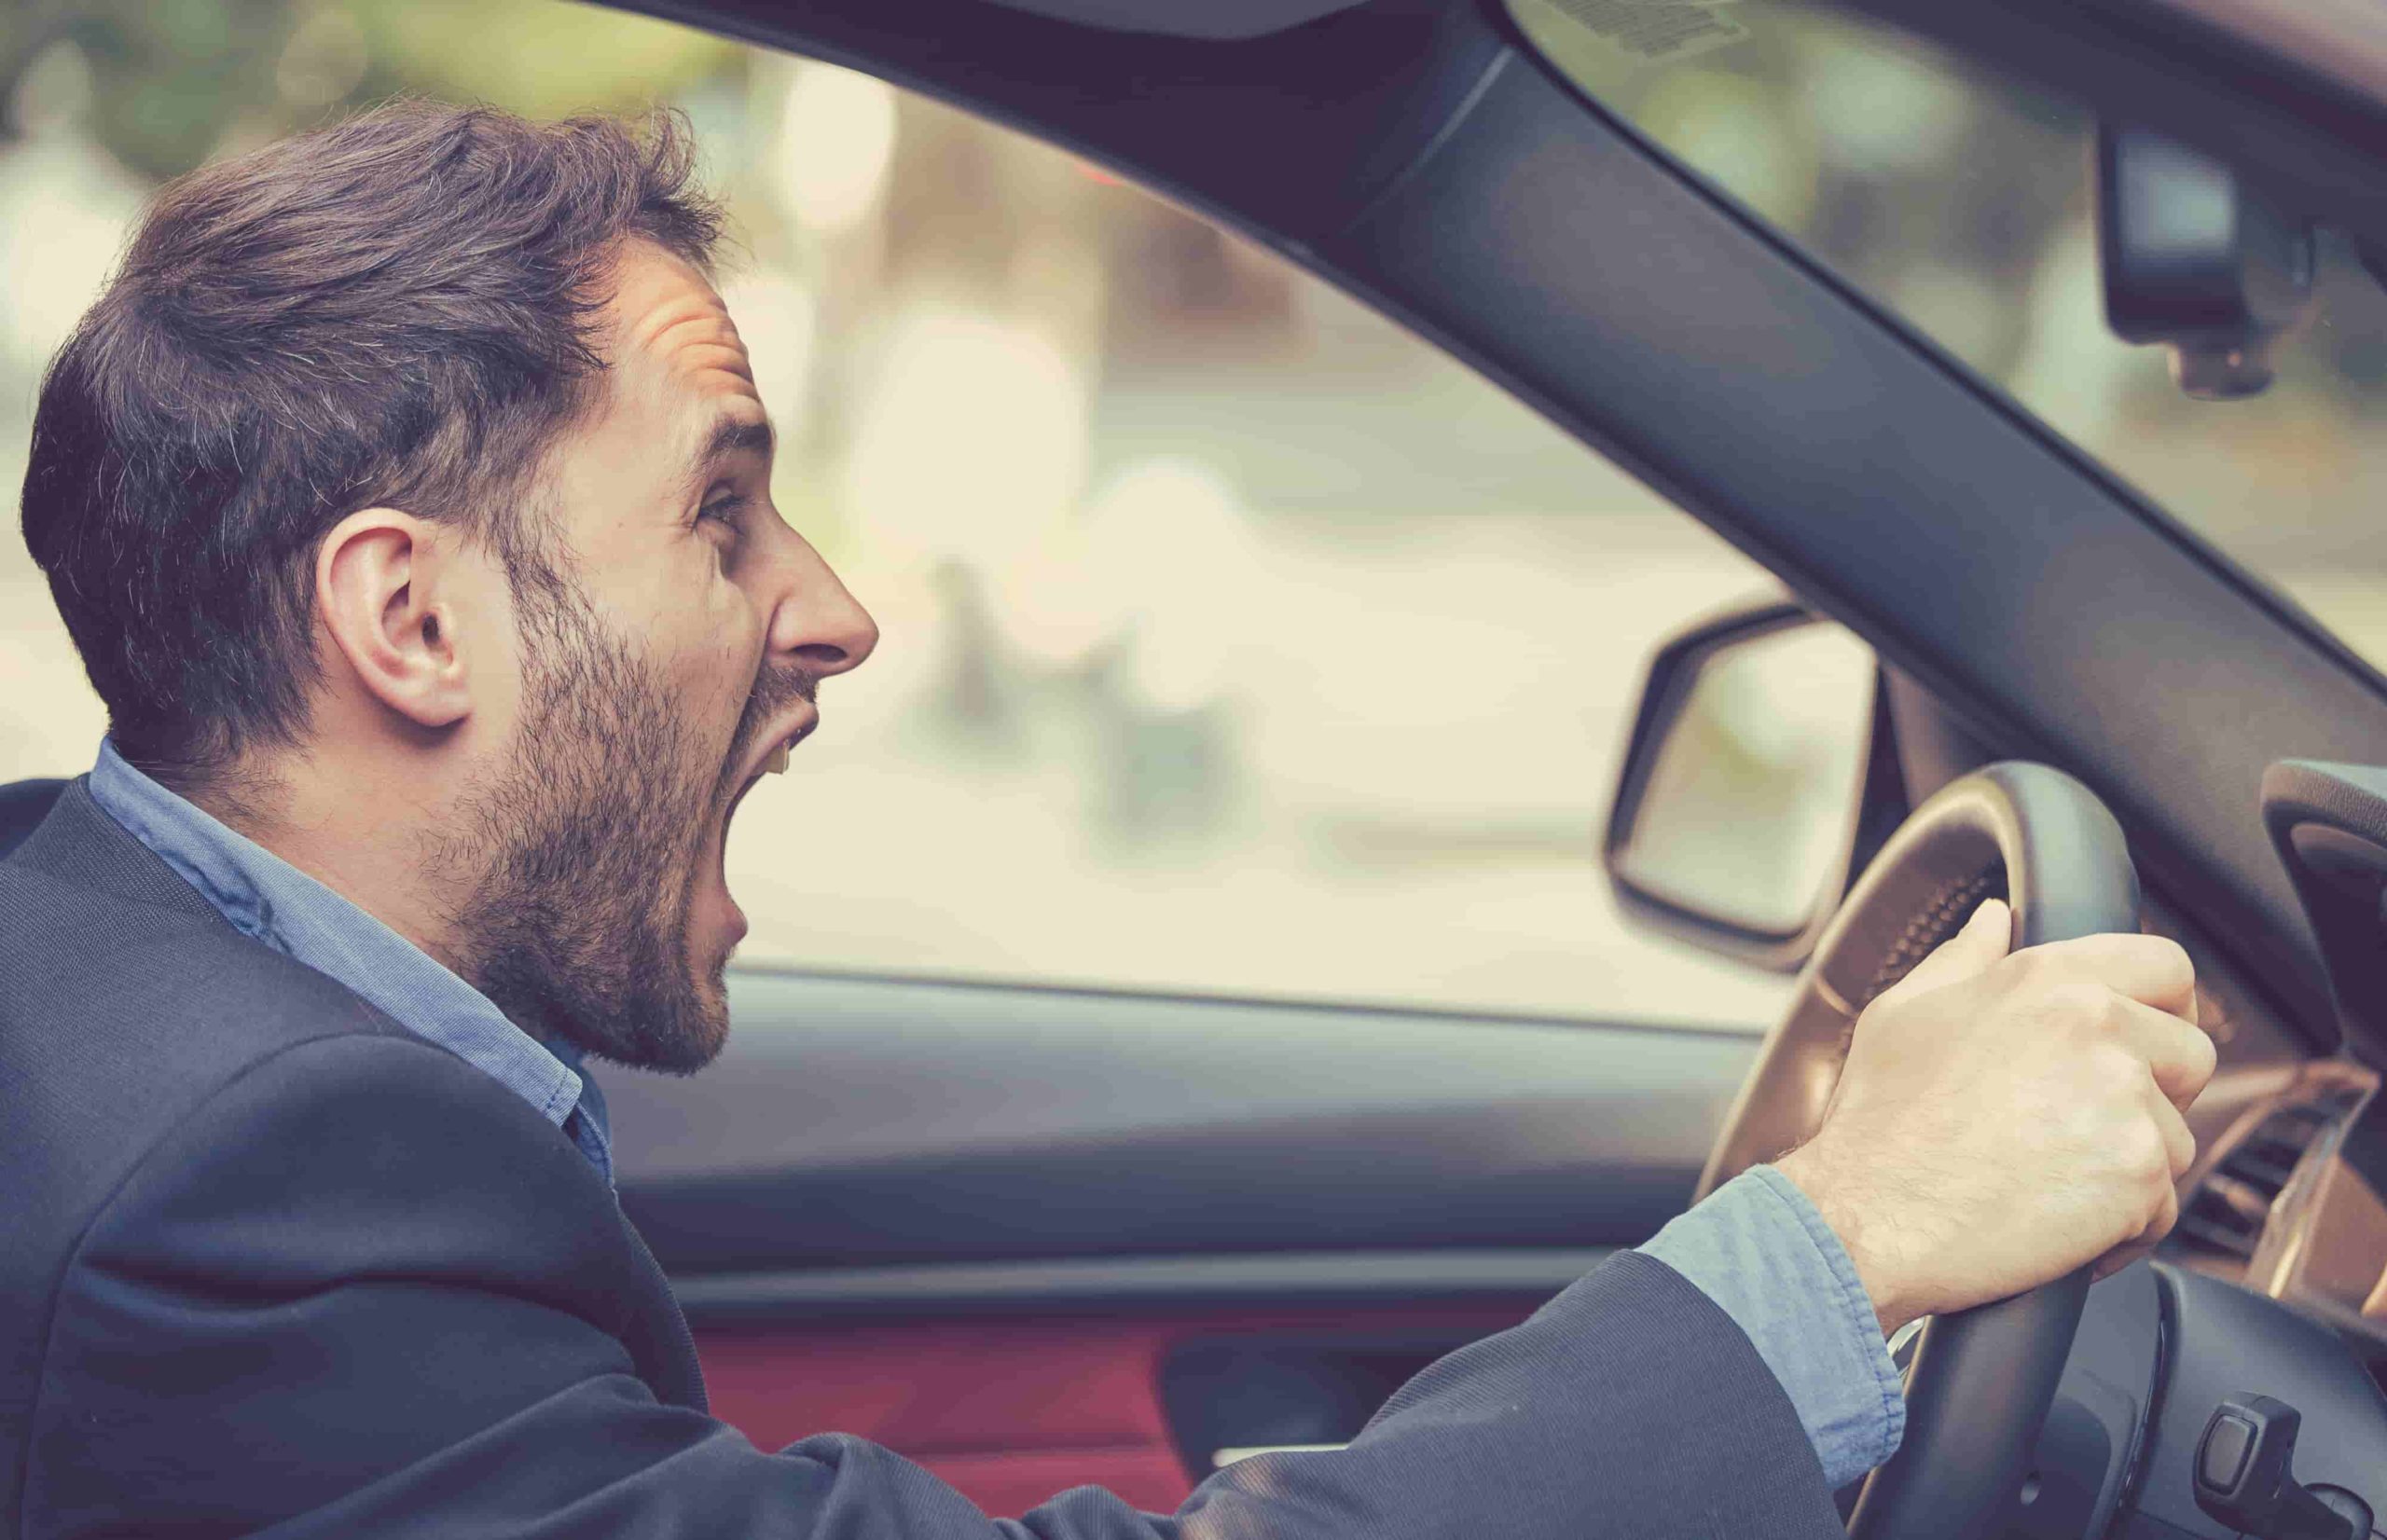 Road Rage Itself is not Considered a Criminal Offense